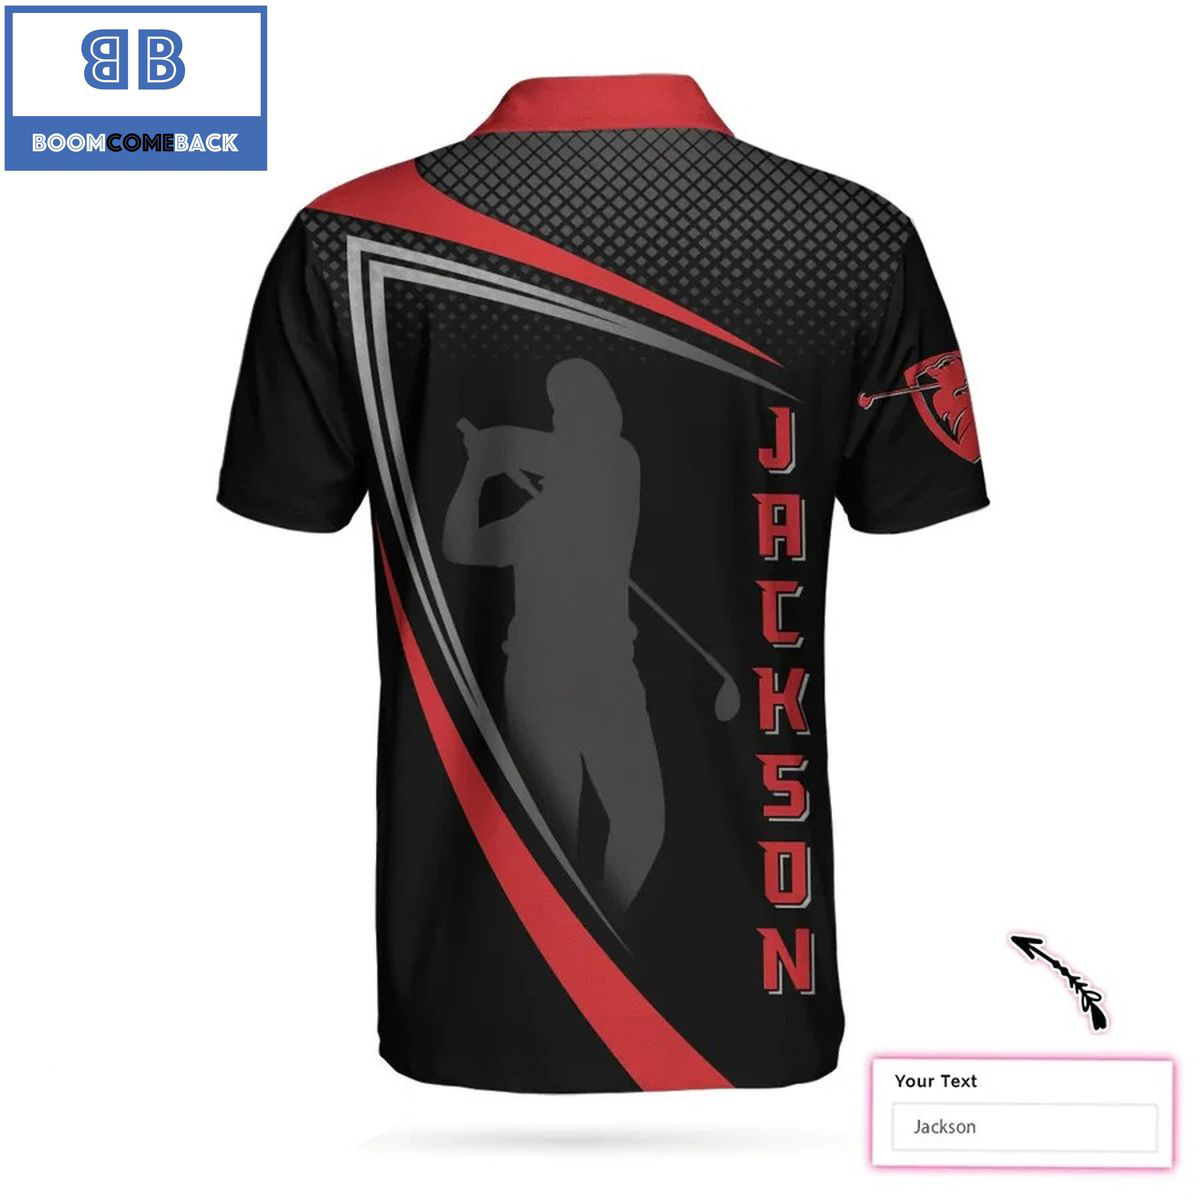 Personalized2BSport2BGolf2BWith2BGolfer2BSilhouette2BAthletic2BCollared2BMens2BPolo2BShirt2B2 fQwO0